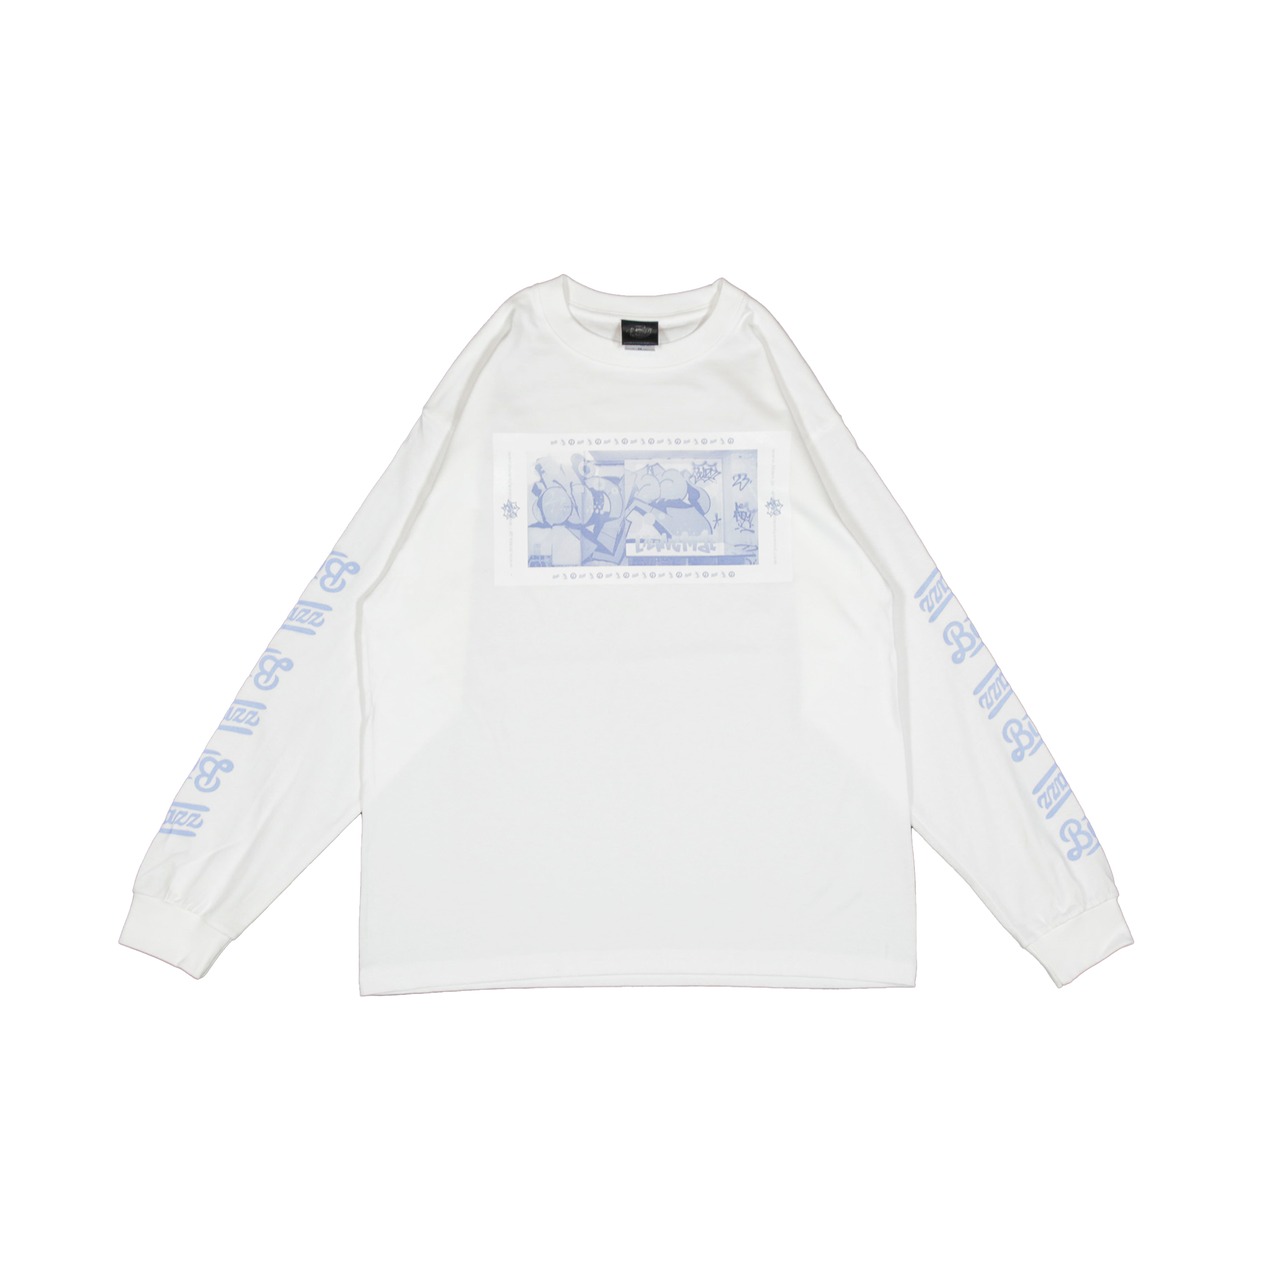 "LOST ISLAND" LMS session 2.3 ft.ATOMONE L/S TEE [WHITE]